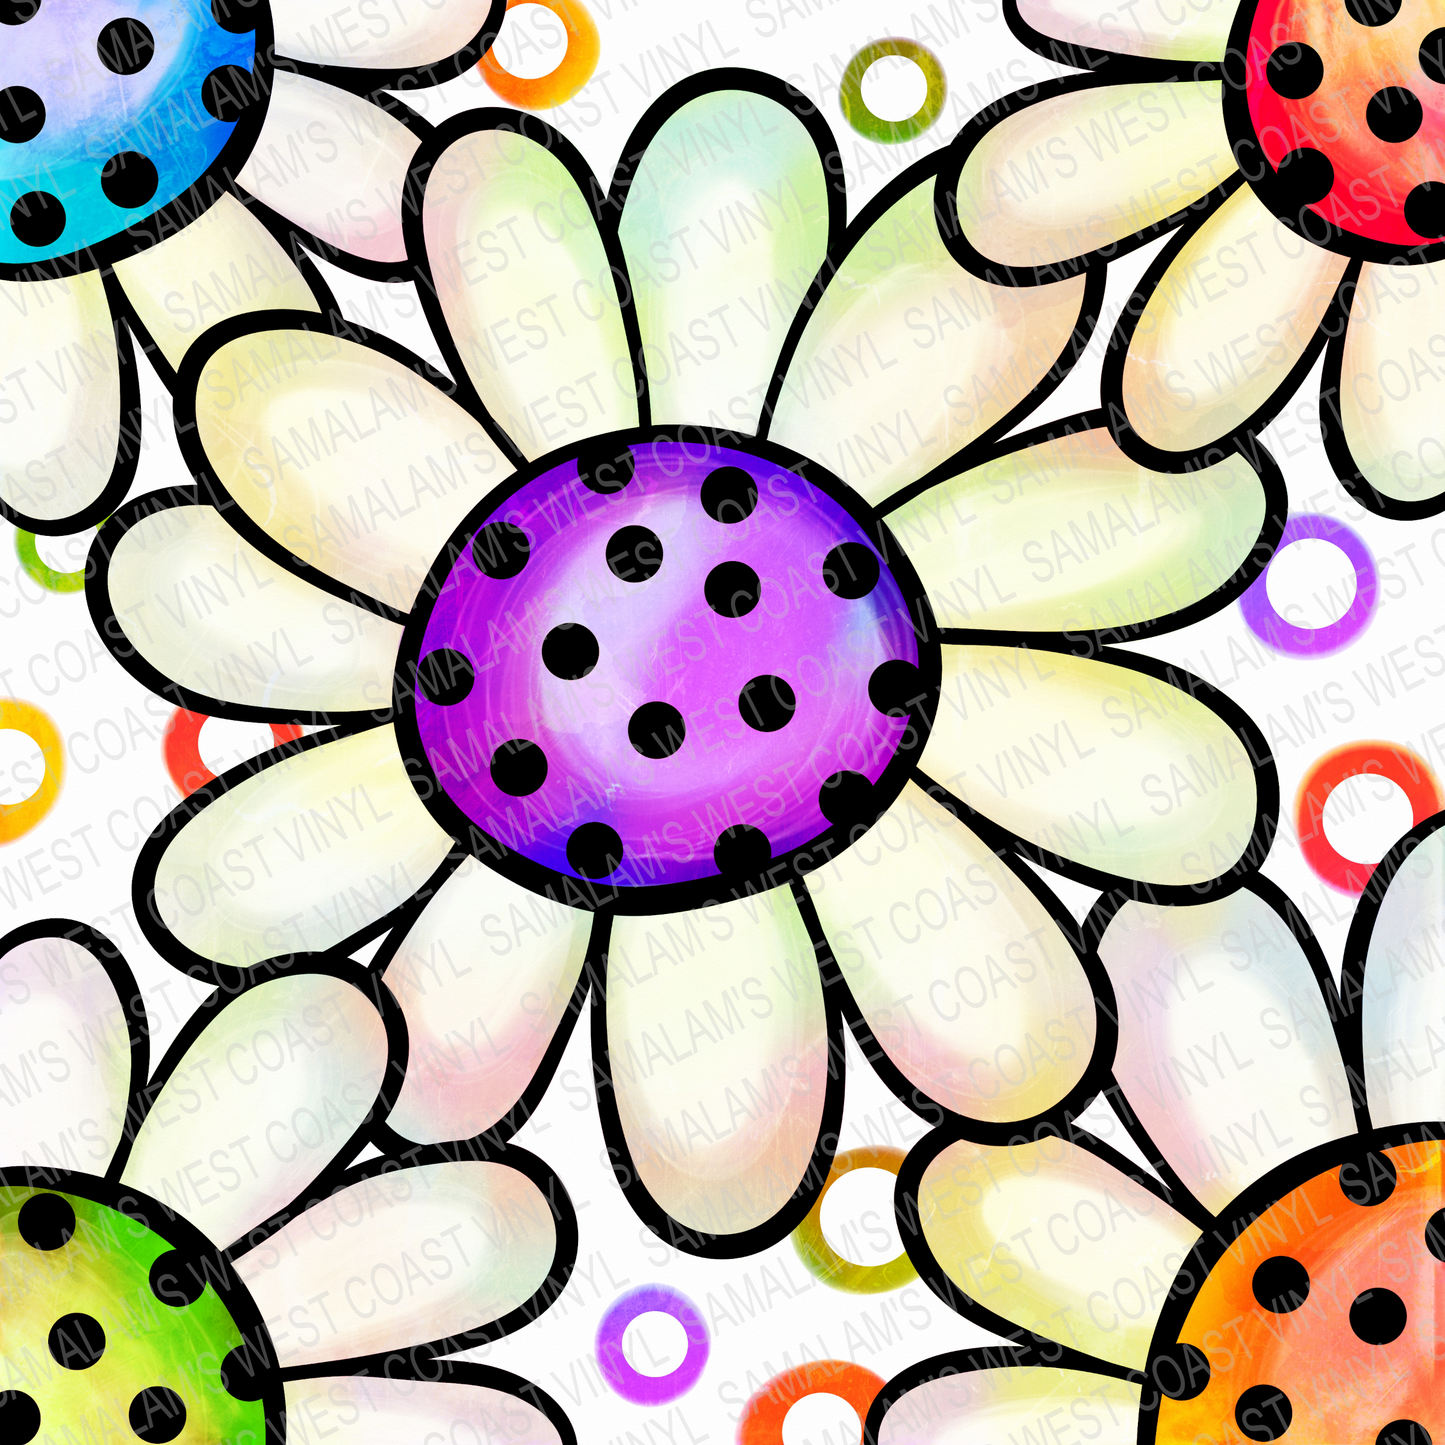 Doodle Daisies - Pack 1 (Not Seamless)